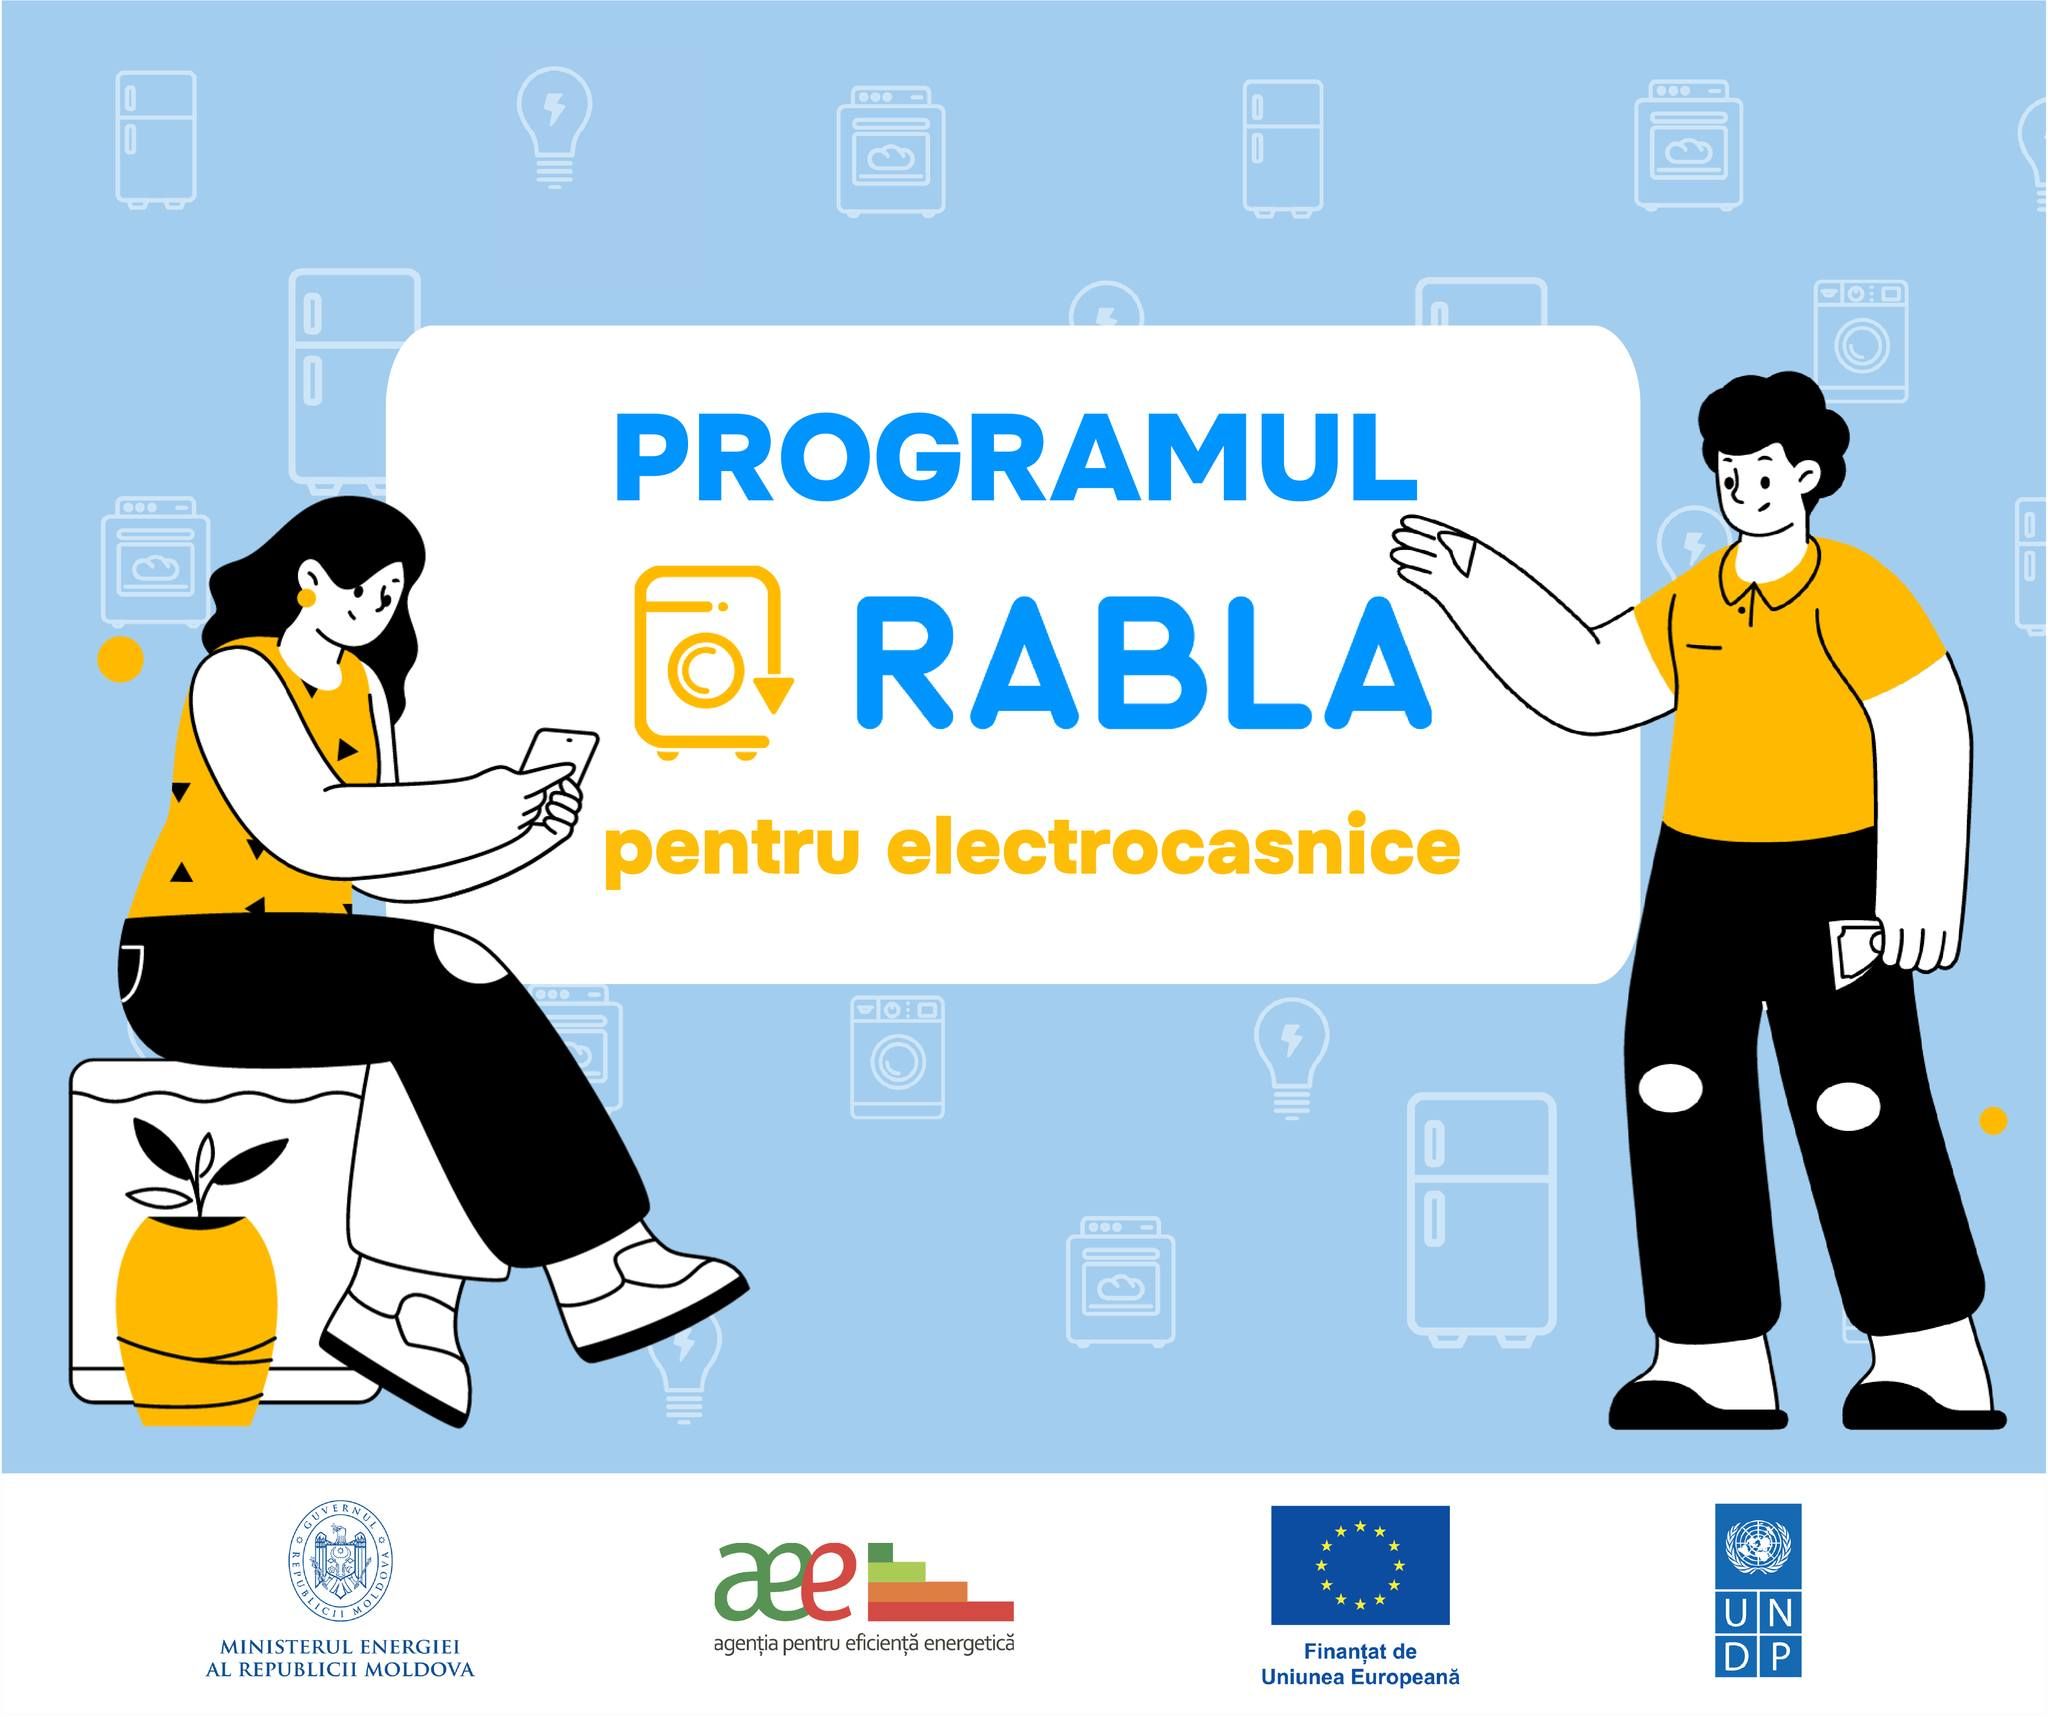 The "Rabla for Household Appliances" programme aims to replace old household equipment, was officially launched in the Republic of Moldova beginning with the first two rounds—one for LED bulbs and one for large equipment.